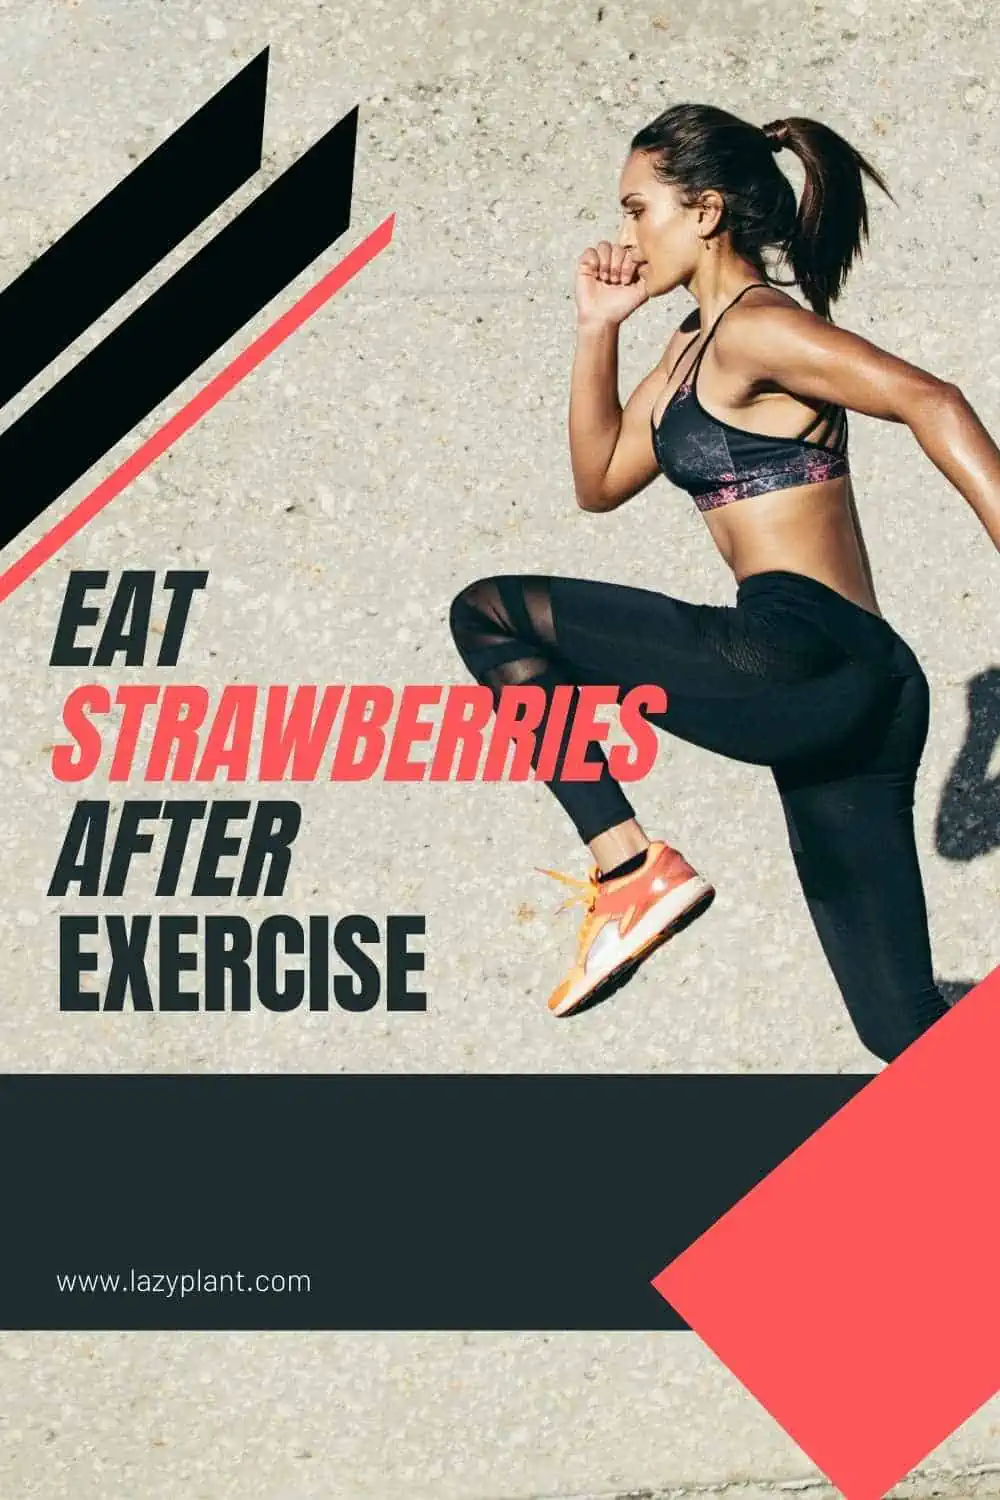 Eating strawberries after exercise supports recovery & muscle growth.